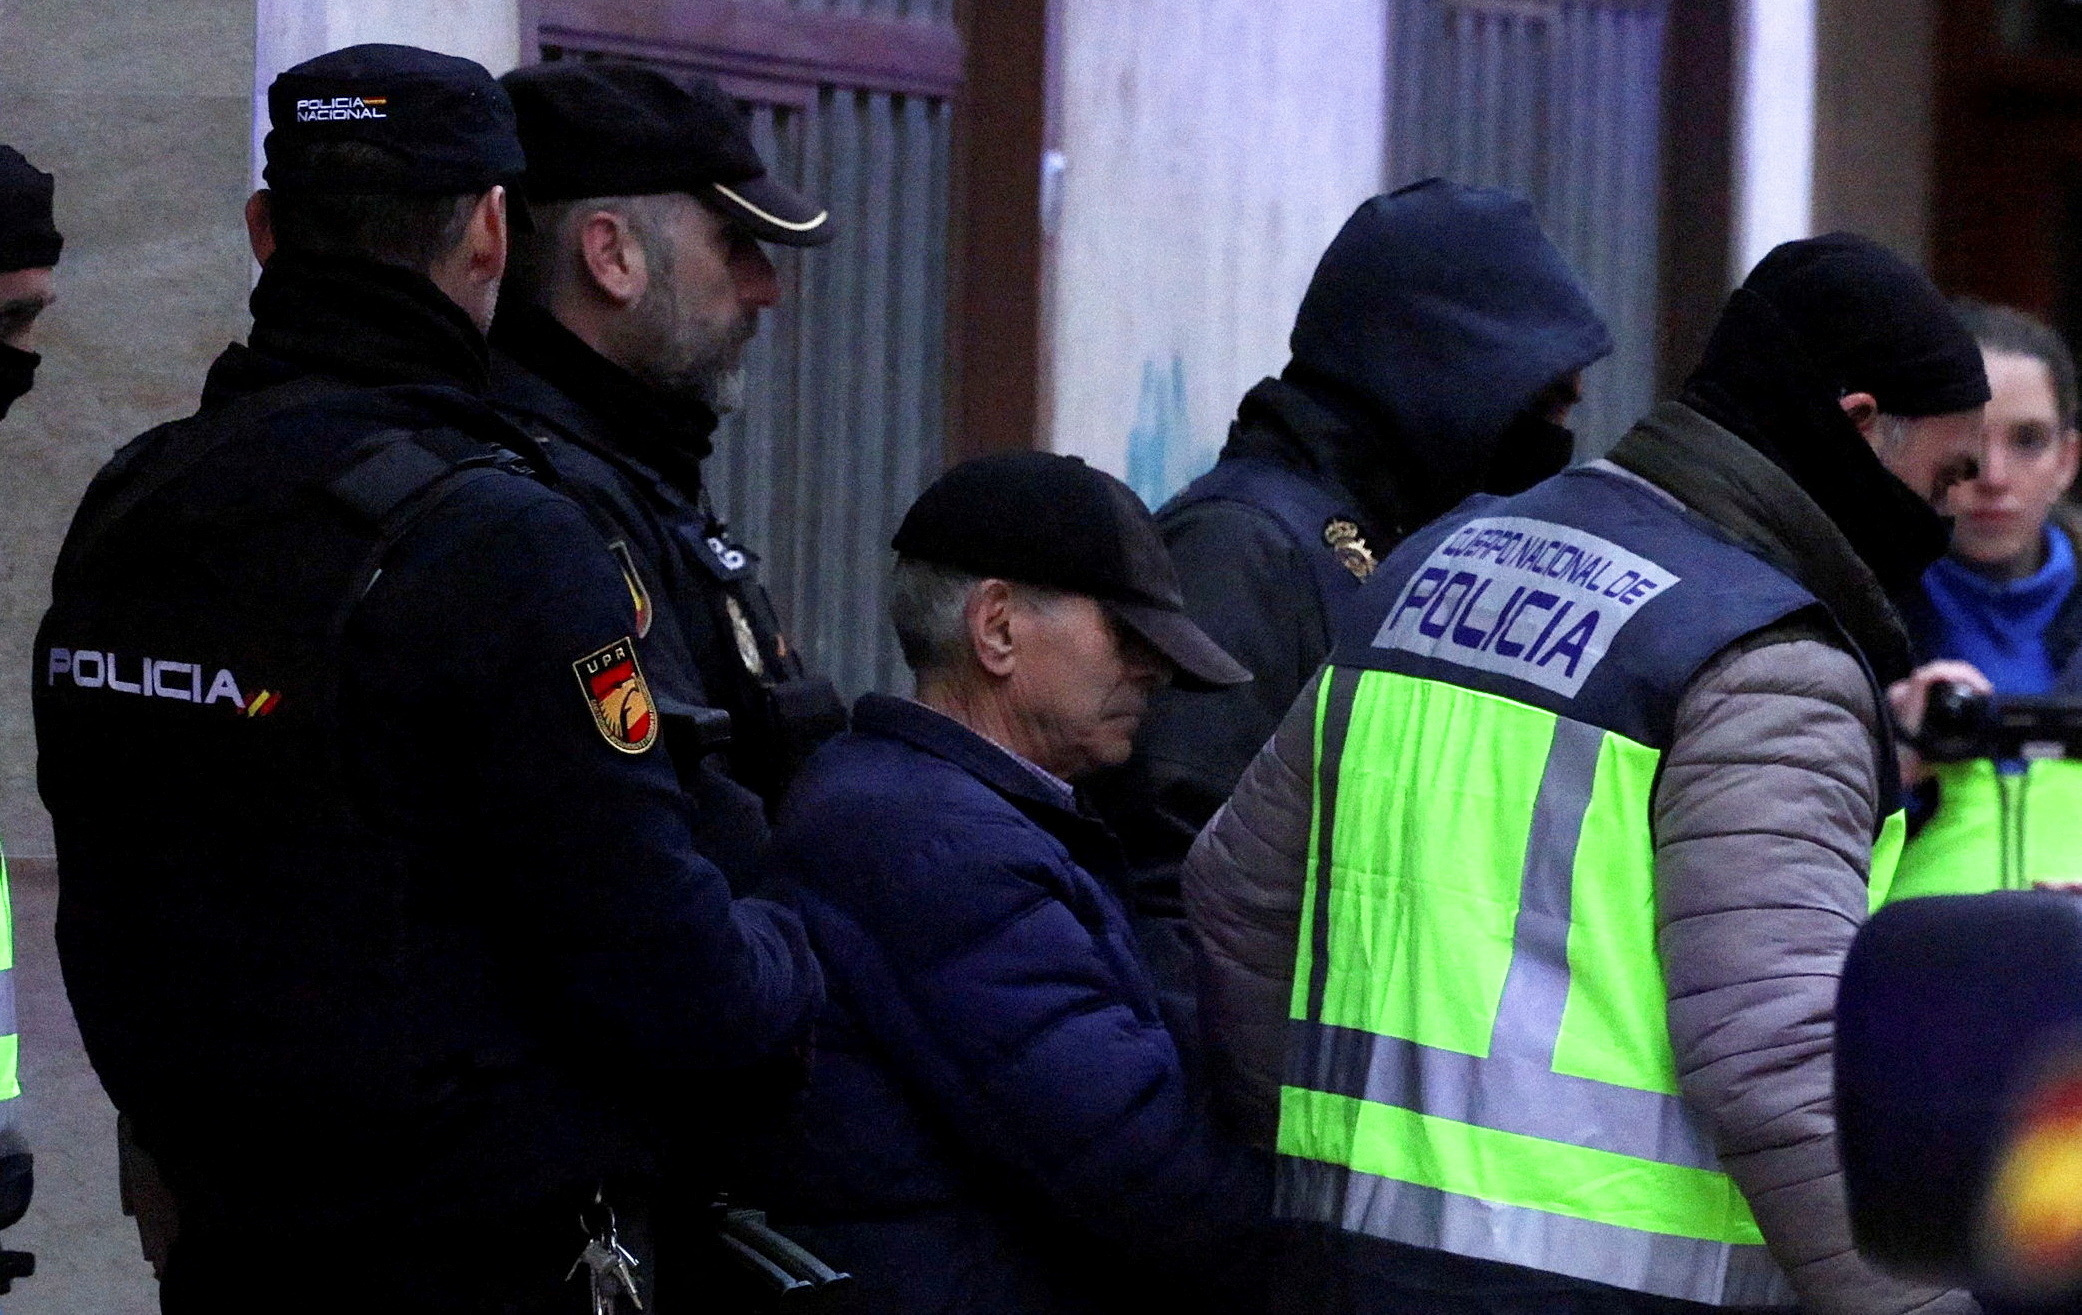 Spanish national police arrest a 74-year-old man linked to letter bombs sent to Ukraine and U.S. embassies, in Miranda de Ebro